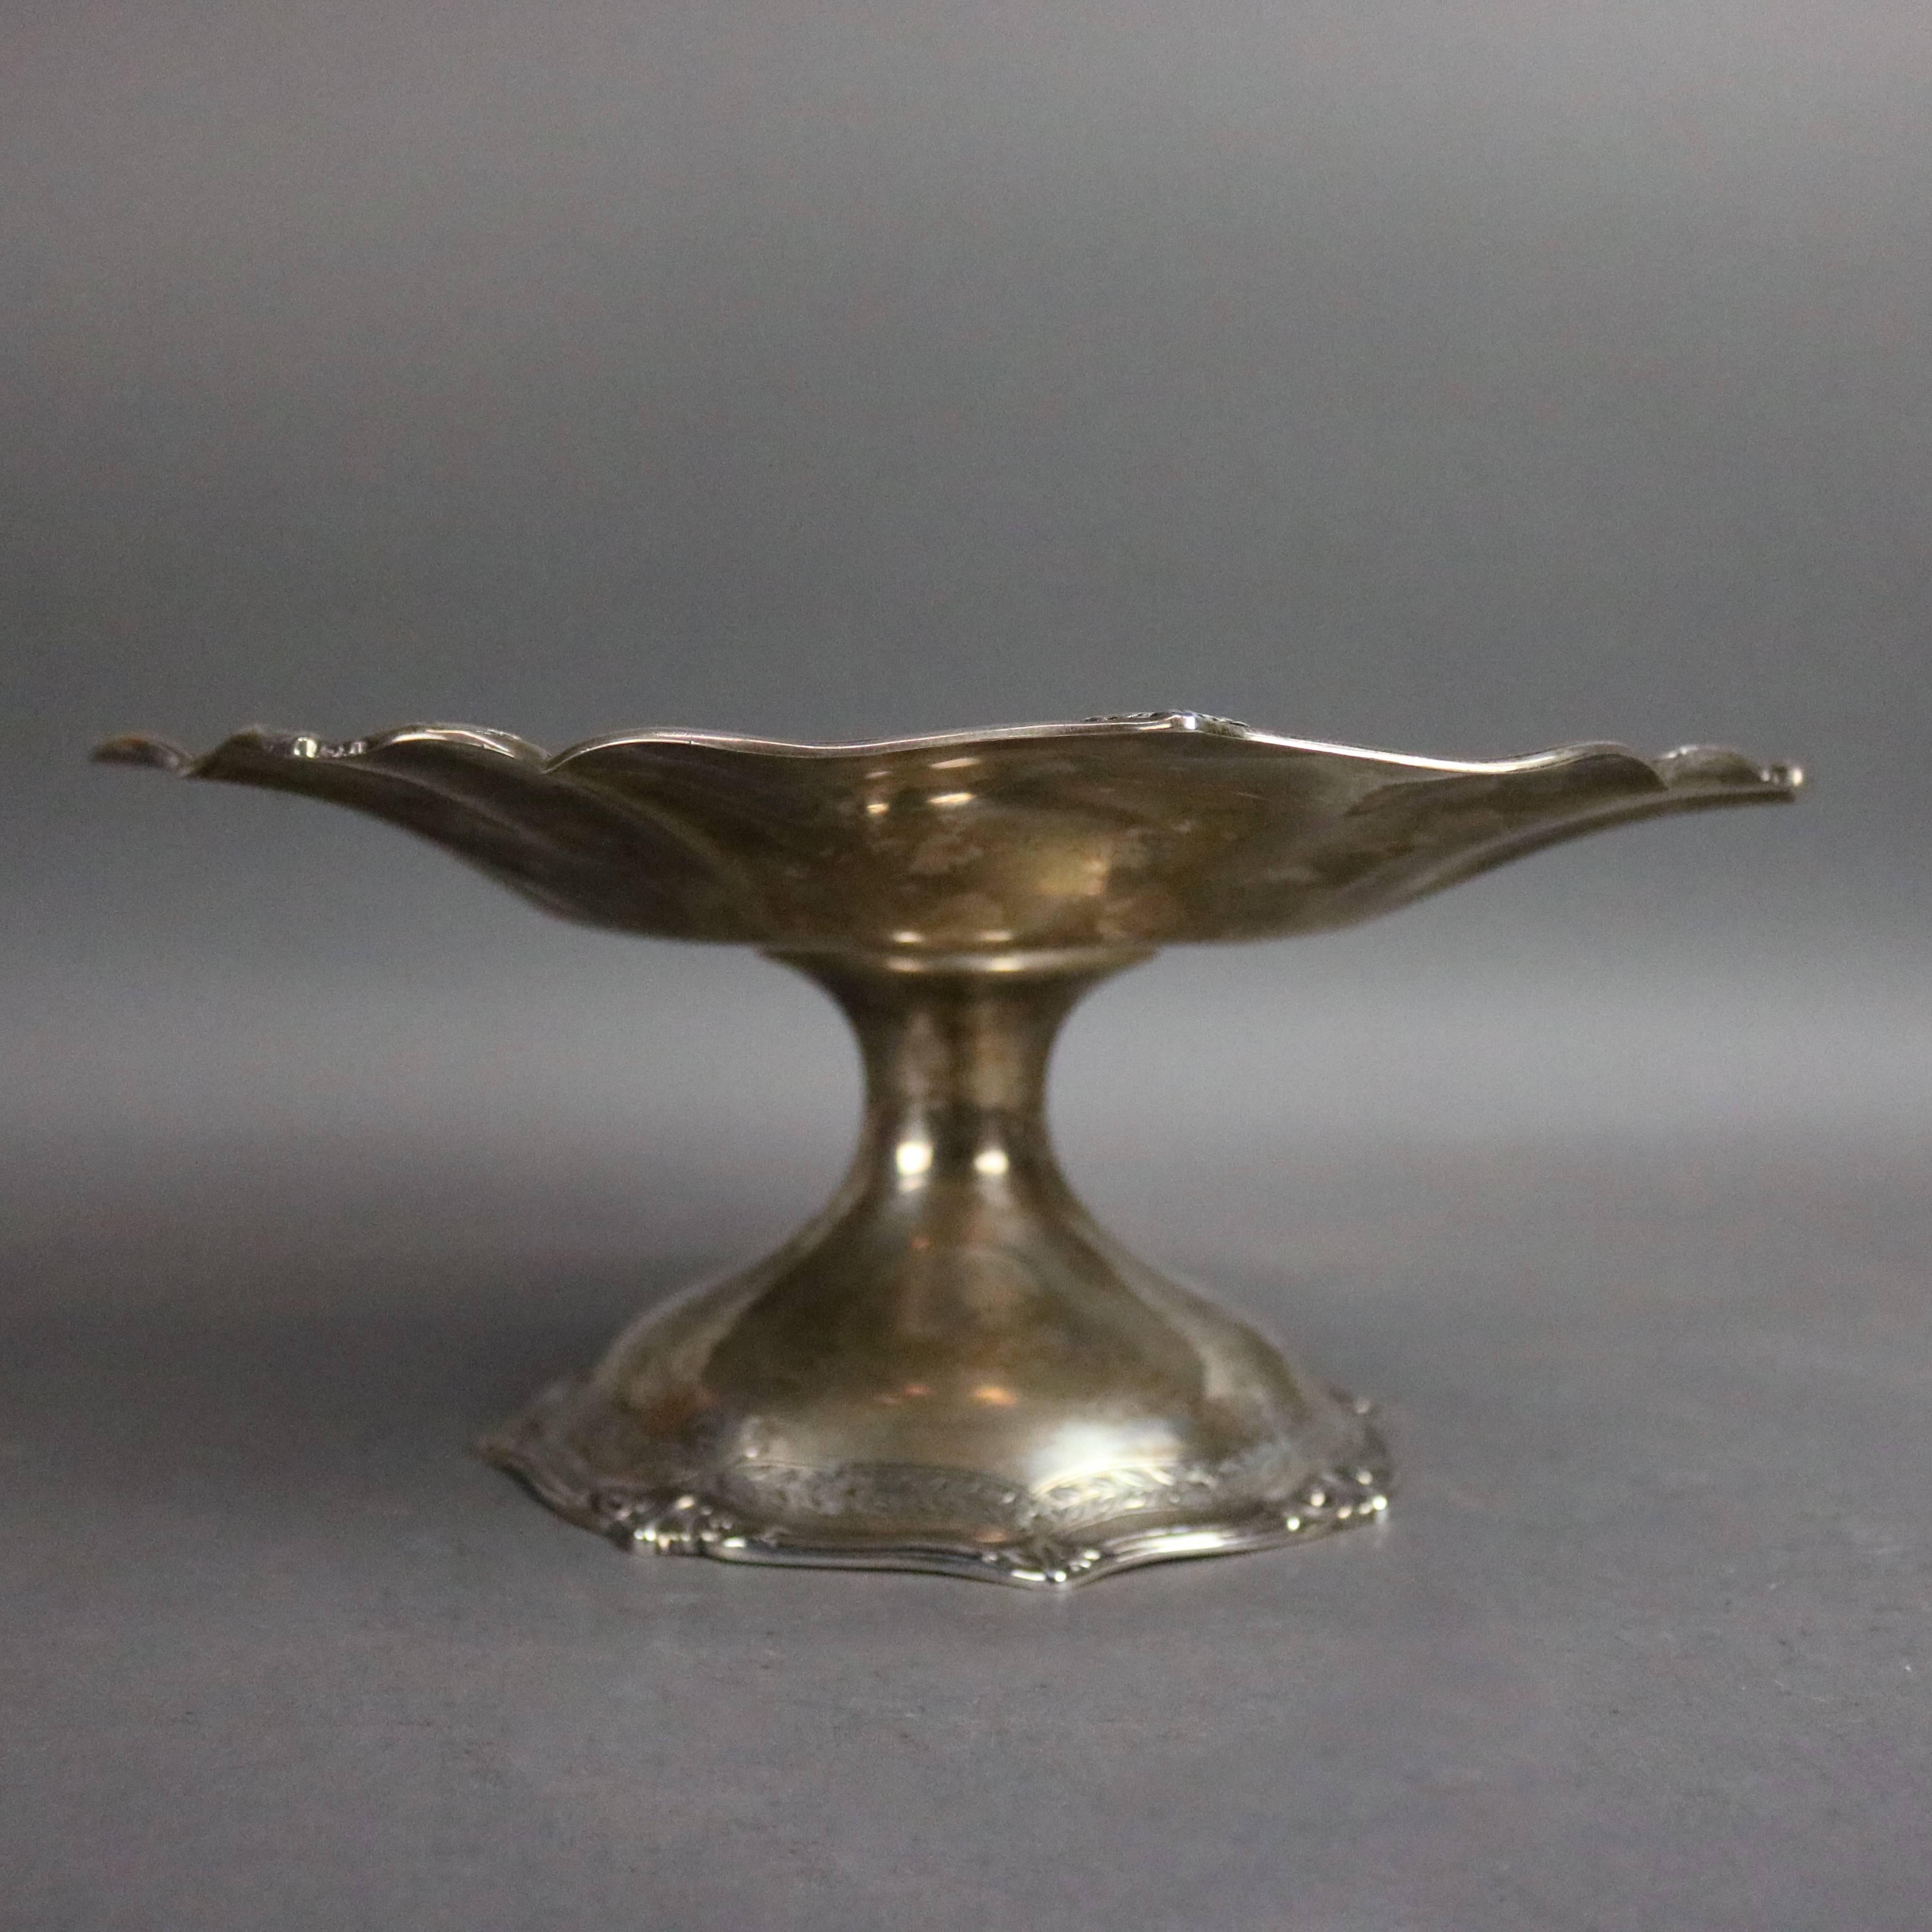 American Antique Sterling Silver the Frank Herschede Co. Compote, circa 1880